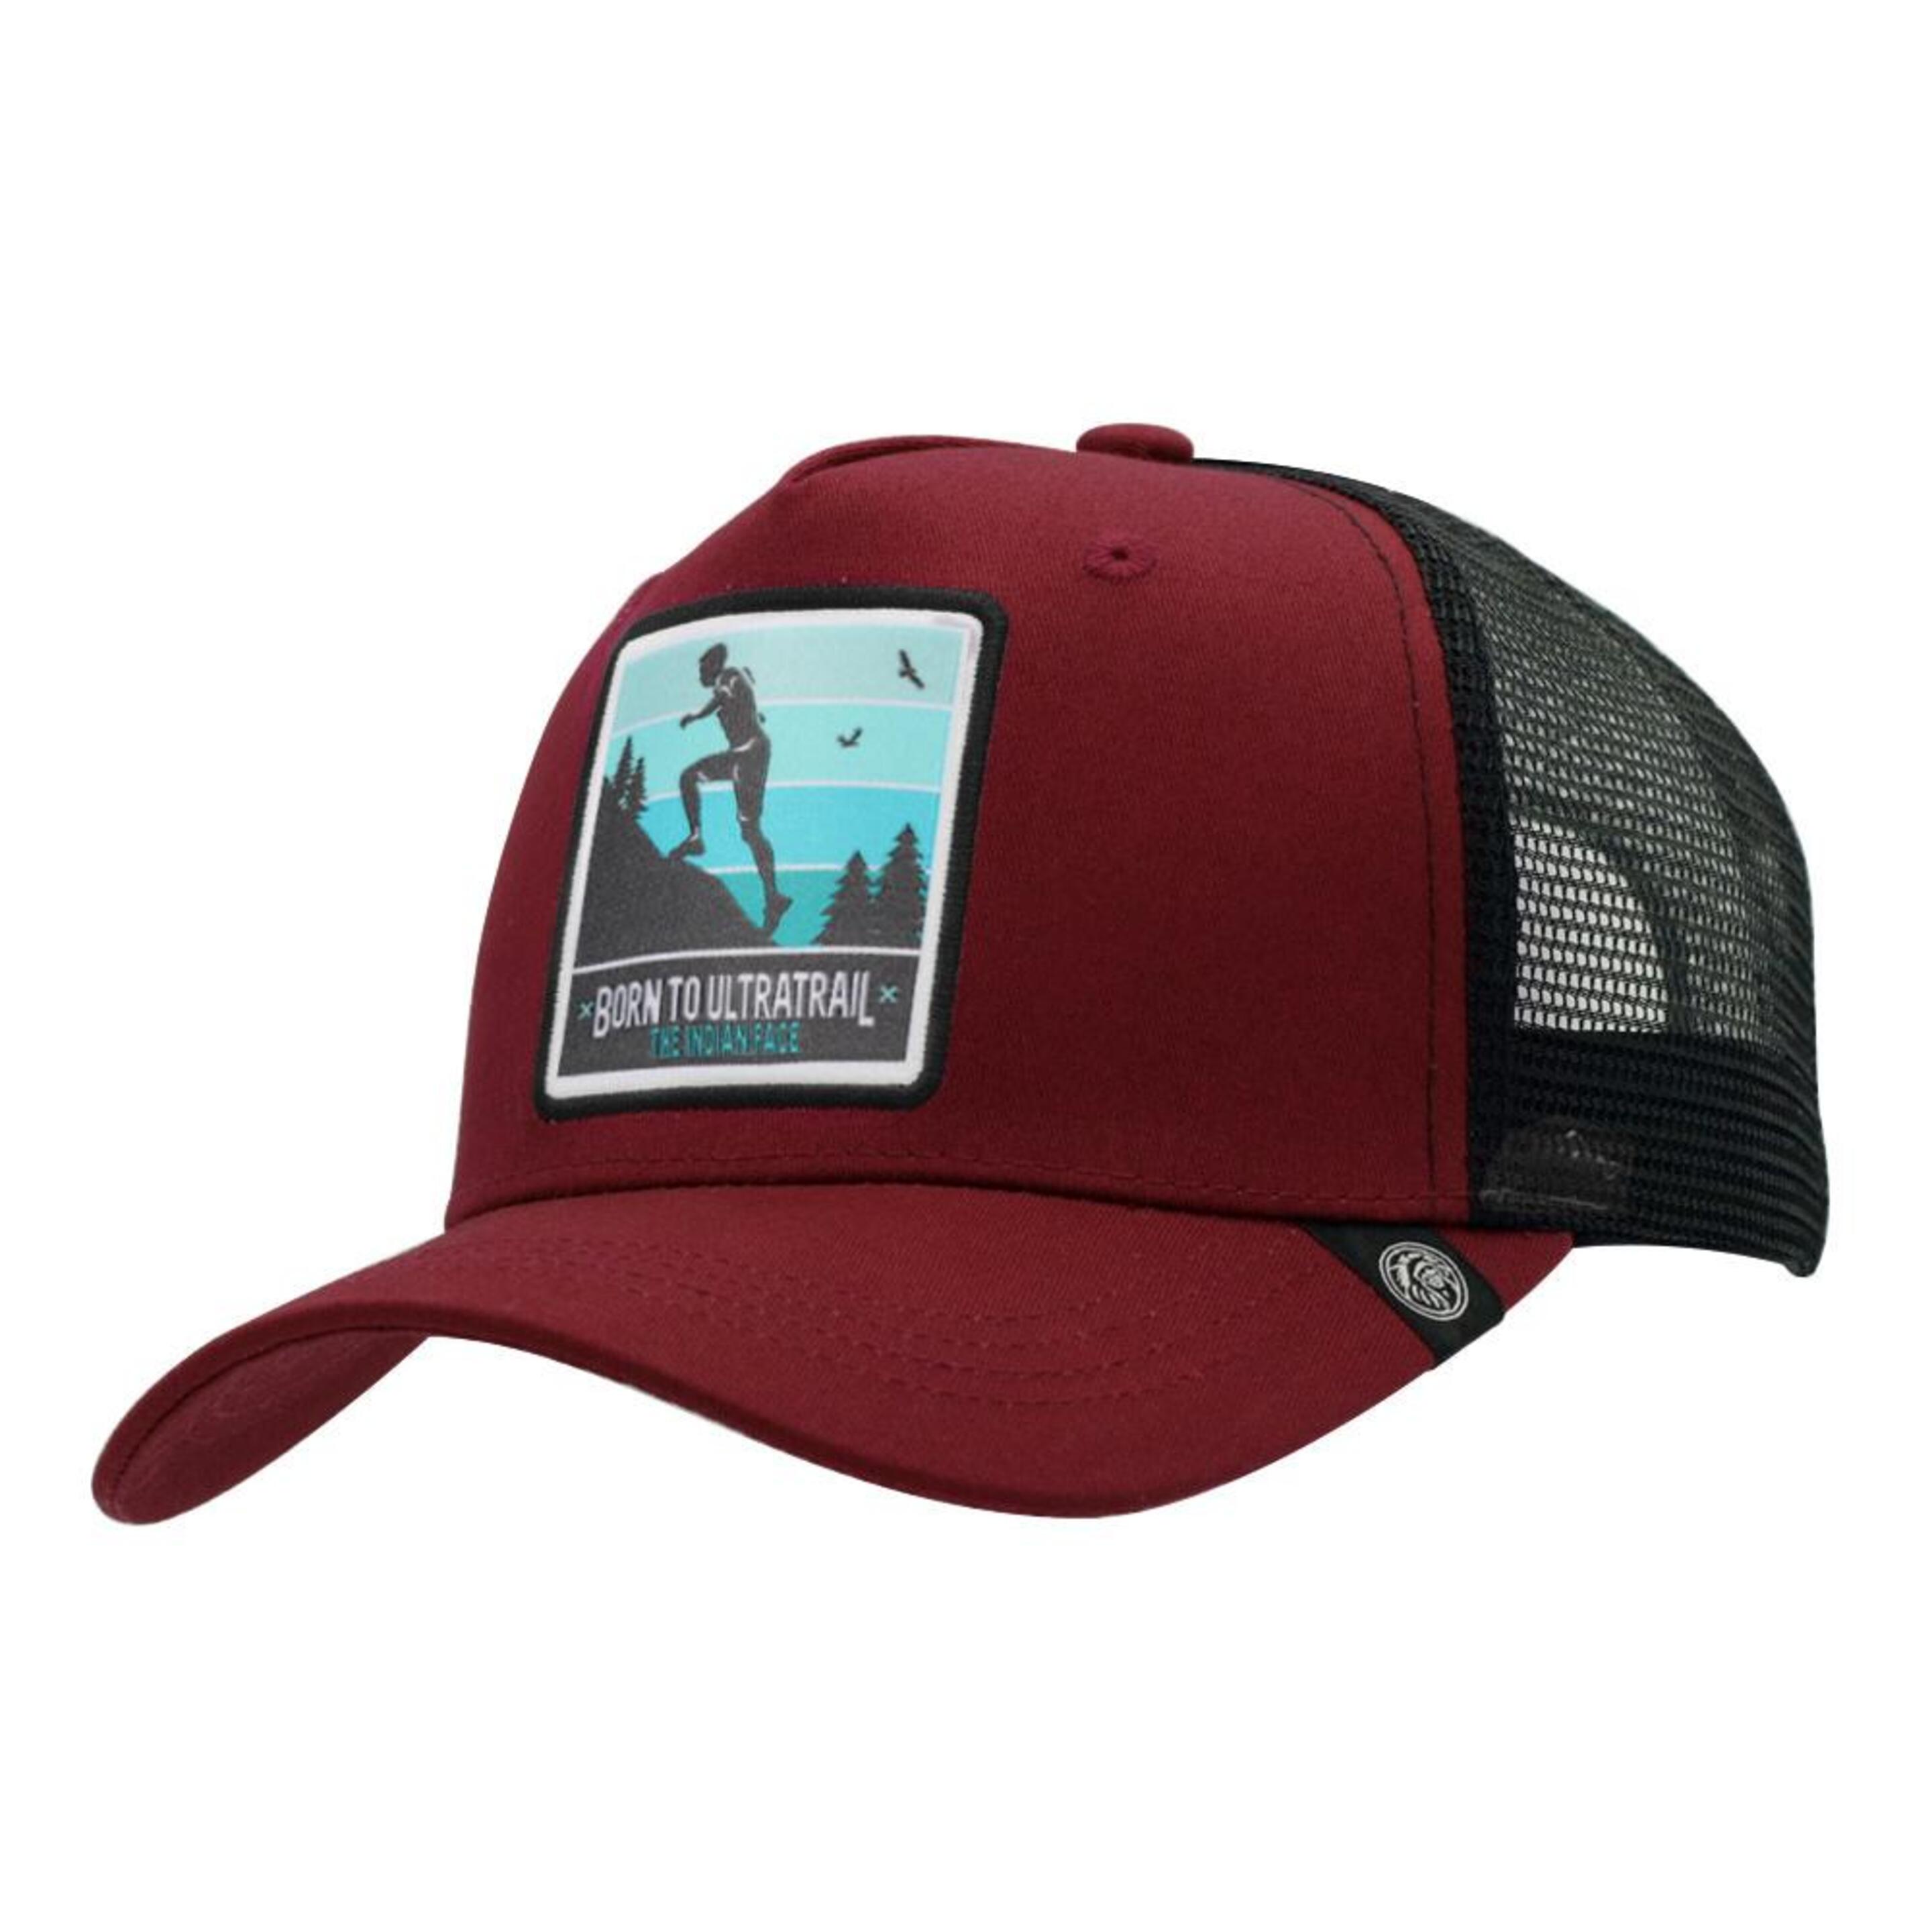 Gorra Trucker Born To Ultratrail Rojo The Indian Face Para Hombre Y Mujer